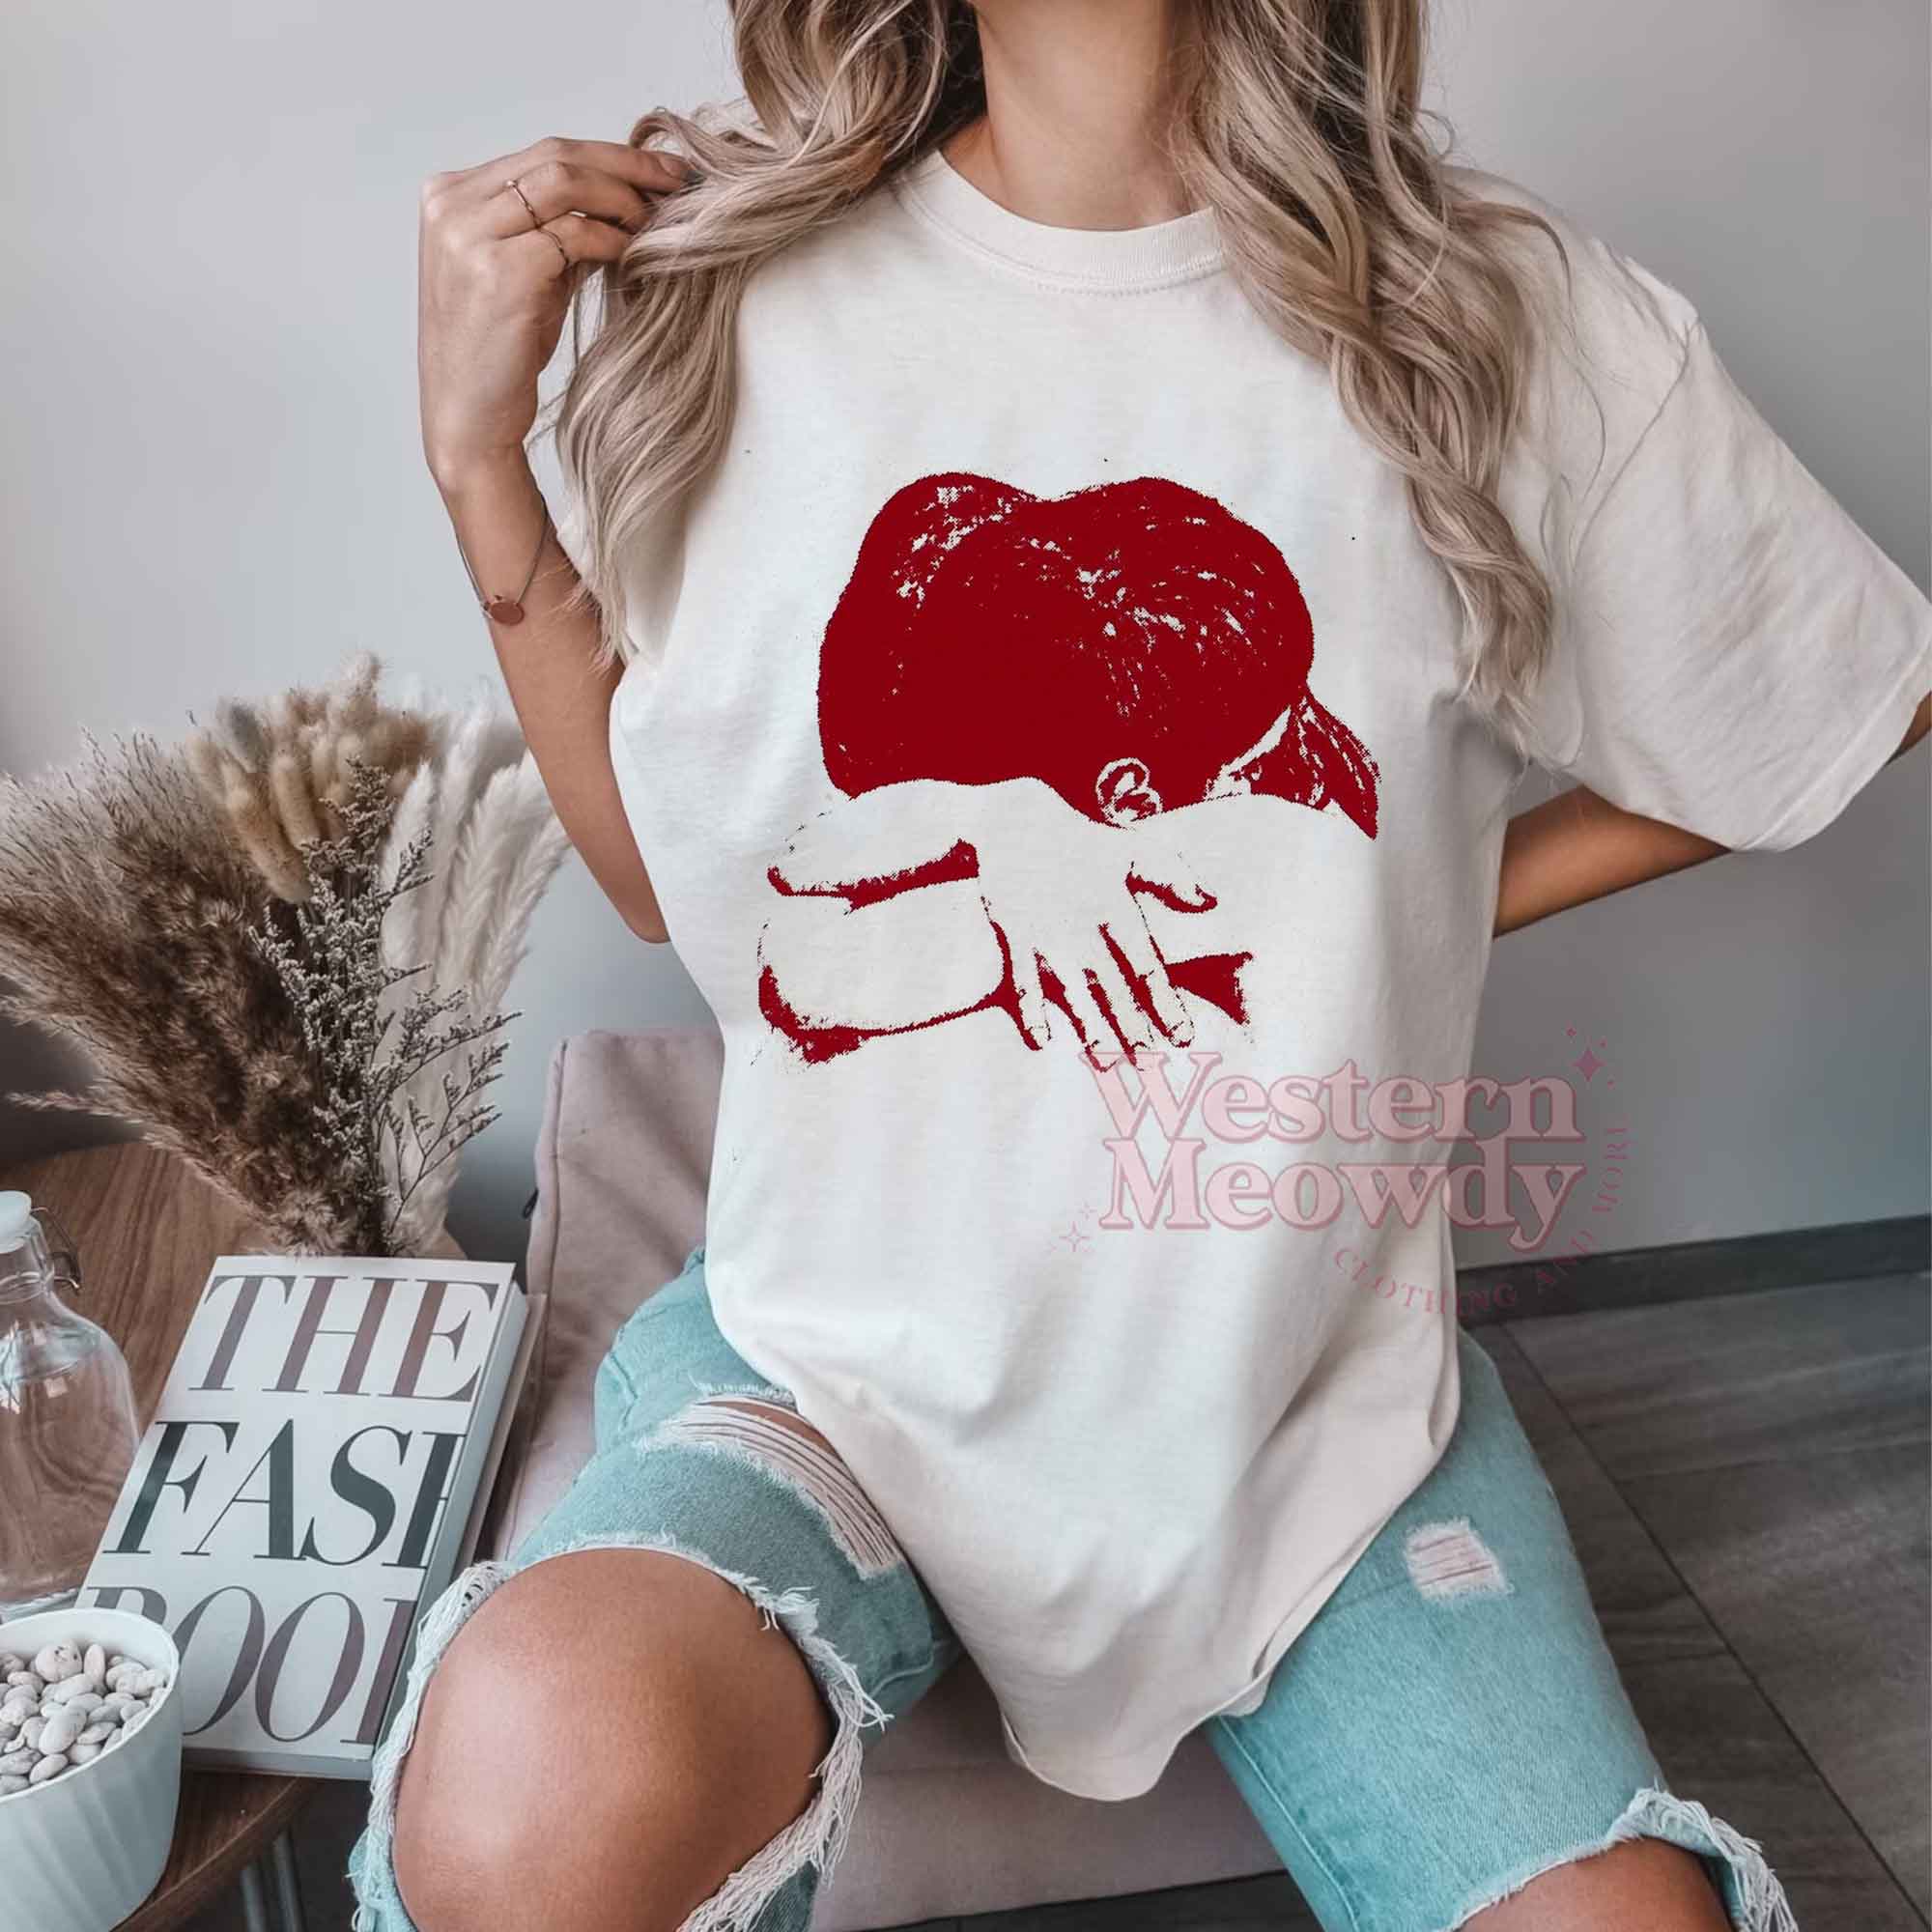 TV Girl French Exit Shirt - Western Meowdy